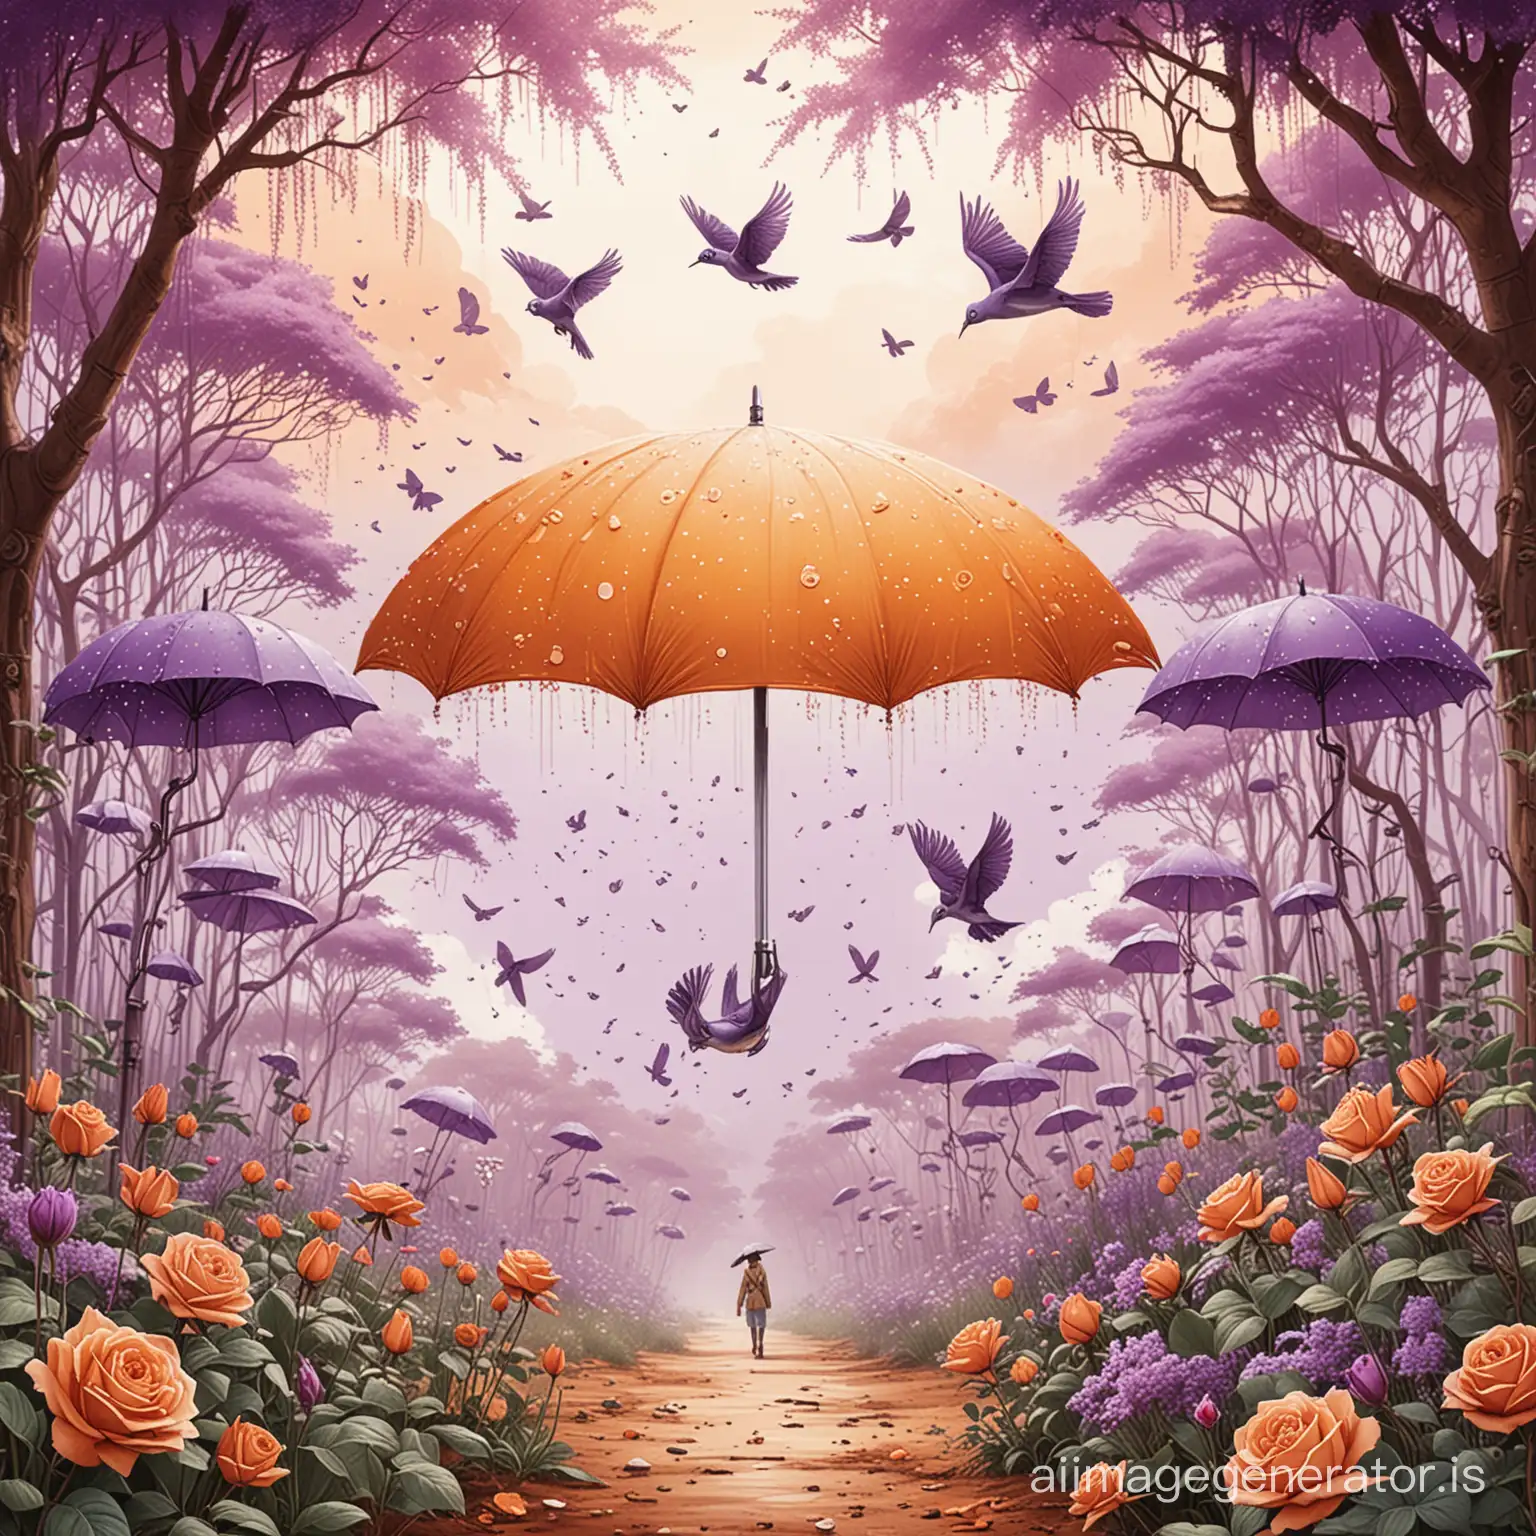 African Designs Coloring Book  monotypes ball well of umbrellas concept art  birds Beige, lilac, and lavender shades - a gentle, romantic range filled with light and vintage grace. The palette can be complemented with purple, gold, and brown. wife silently wander I walk through the forest orange The deeper I sink in, the more strongly I feel the trees clouds illustration digital drawing cute smiling robot, tech eco city, roses, plants